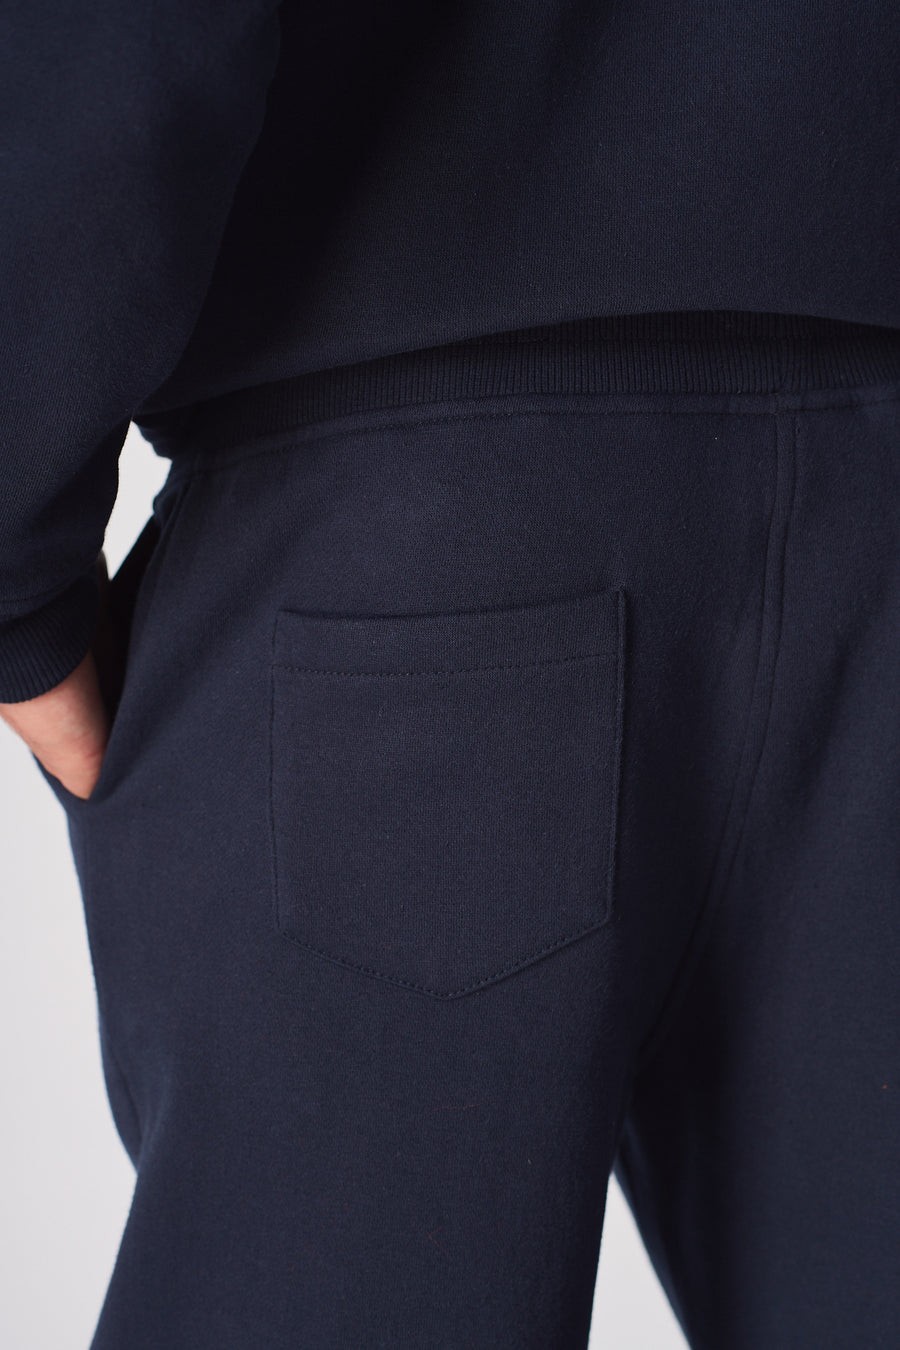 EMBROIDERY DETAIL TRACKSUIT JOGGERS - NAVY BLUE